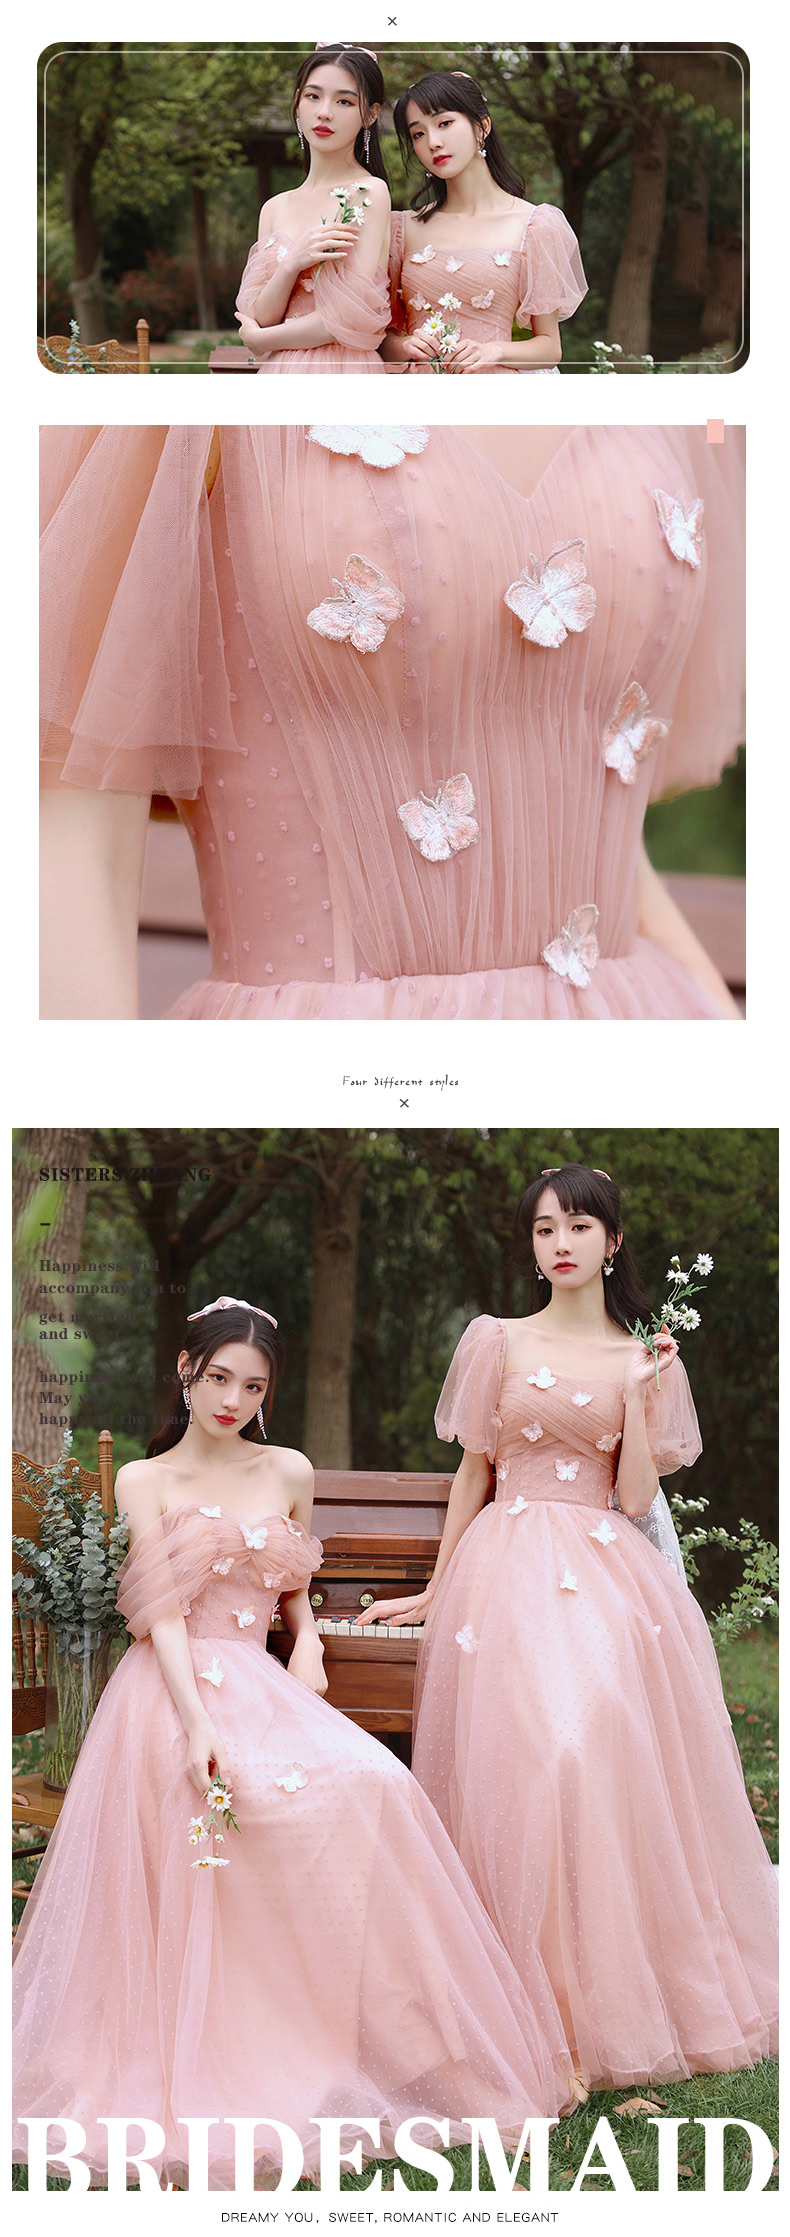 A-Line-Pink-Tulle-Bridesmaid-Formal-Wedding-Guest-Party-Dress13.jpg